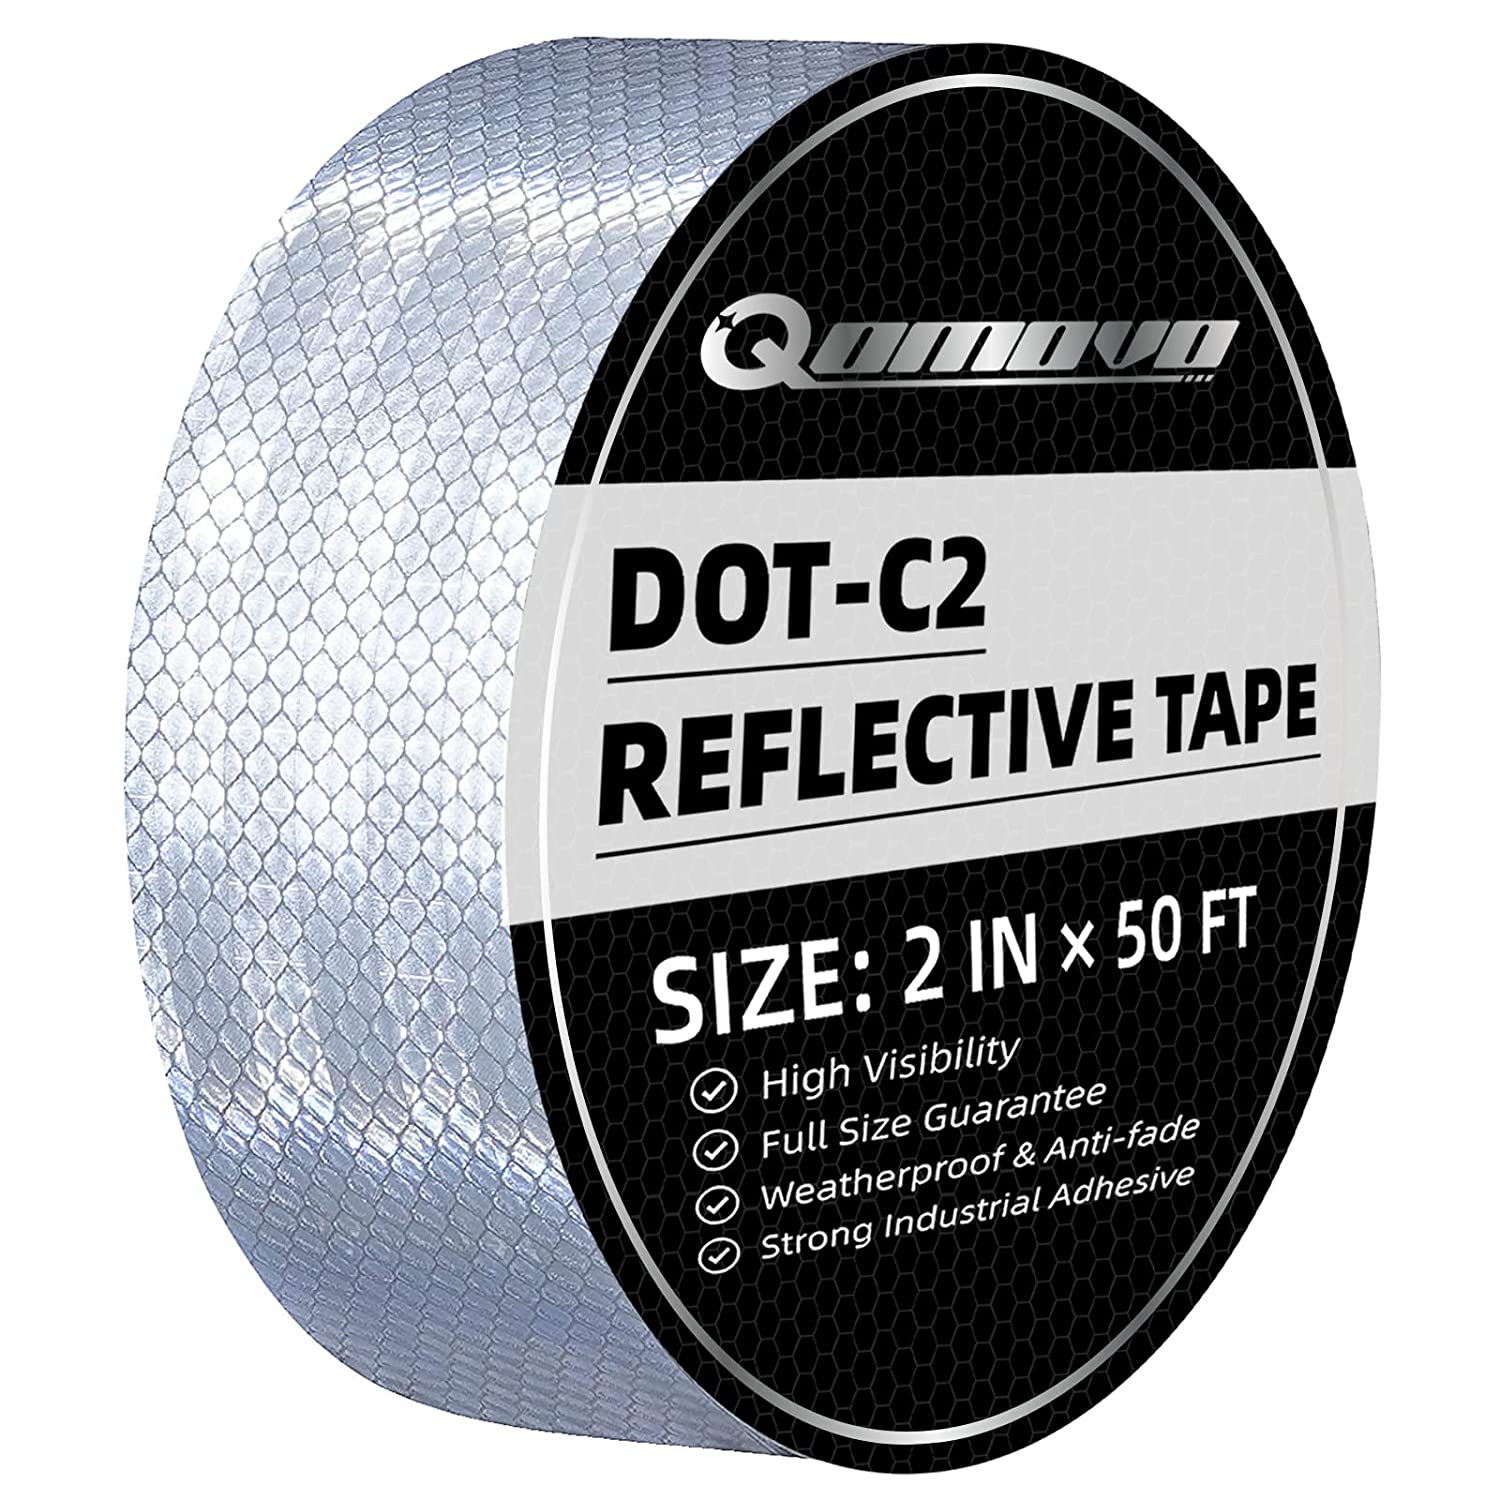 Qomovo Department of Transportation Certified Anti-Fade Reflective Tape